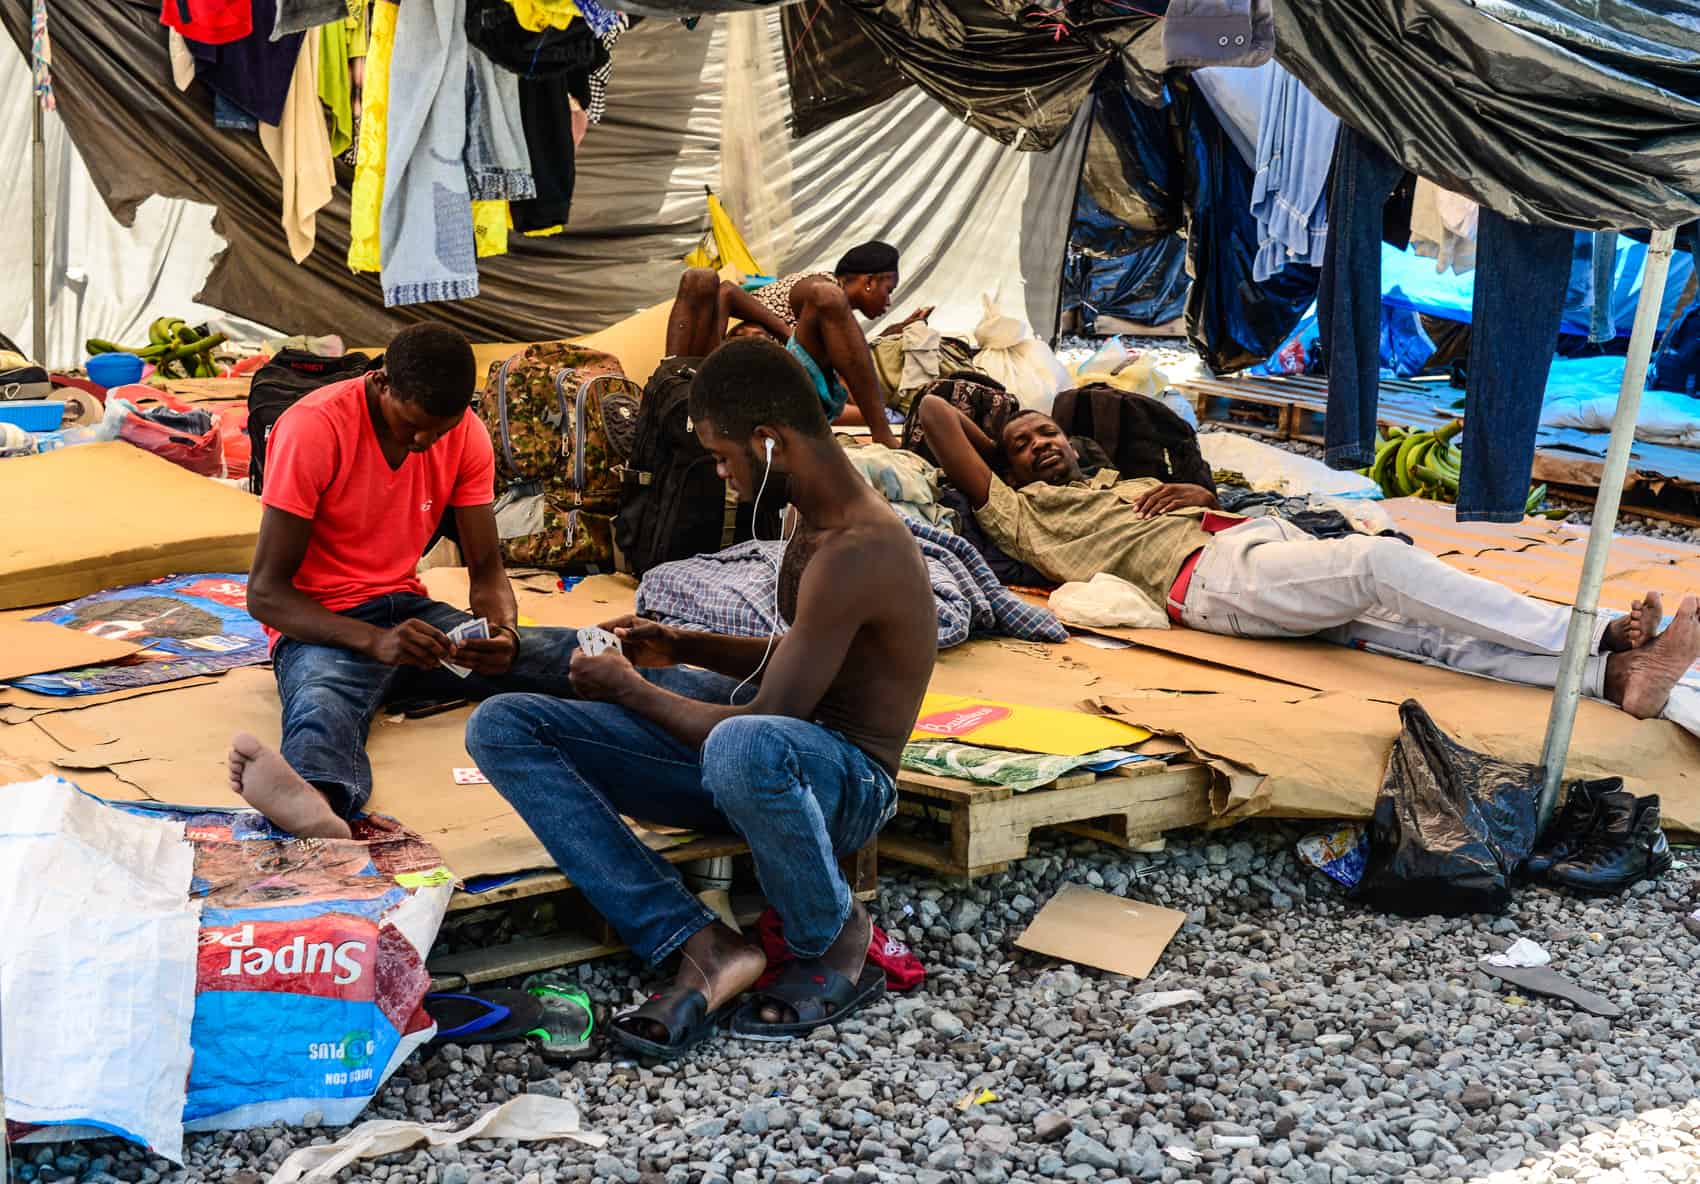 African migrants play cards in a Red Cross tent.